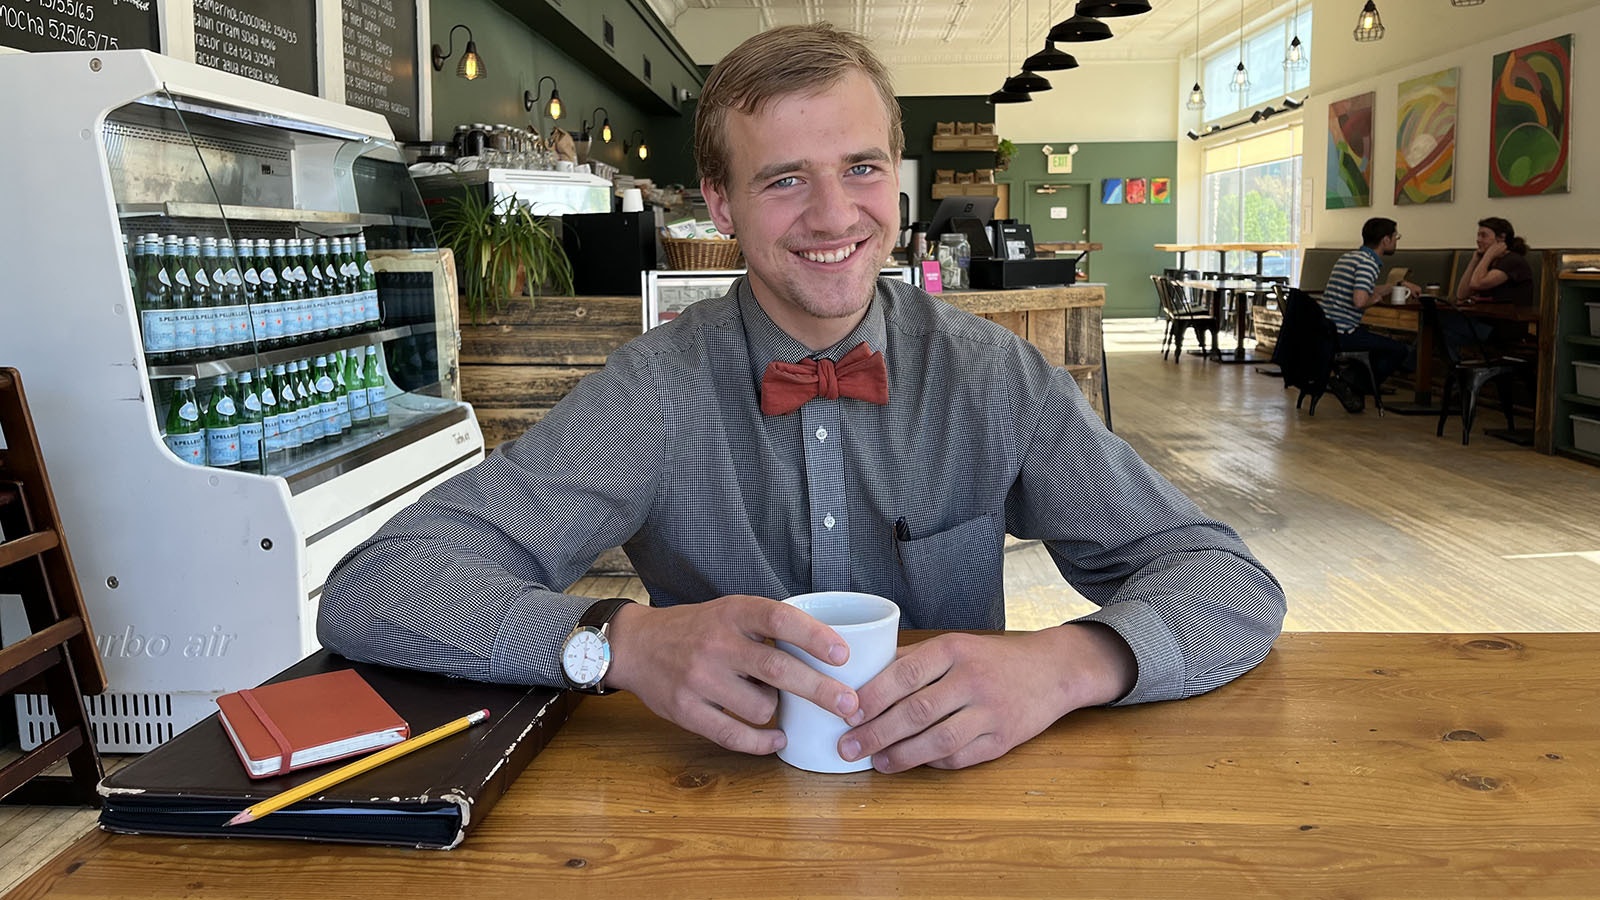 Kolya Sidloski, a Wyoming Catholic College student, in a contemplative mood at Sinks Coffee in Lander. Like all other WCC students, Sidloski gives up his cellphone for four years while attending.